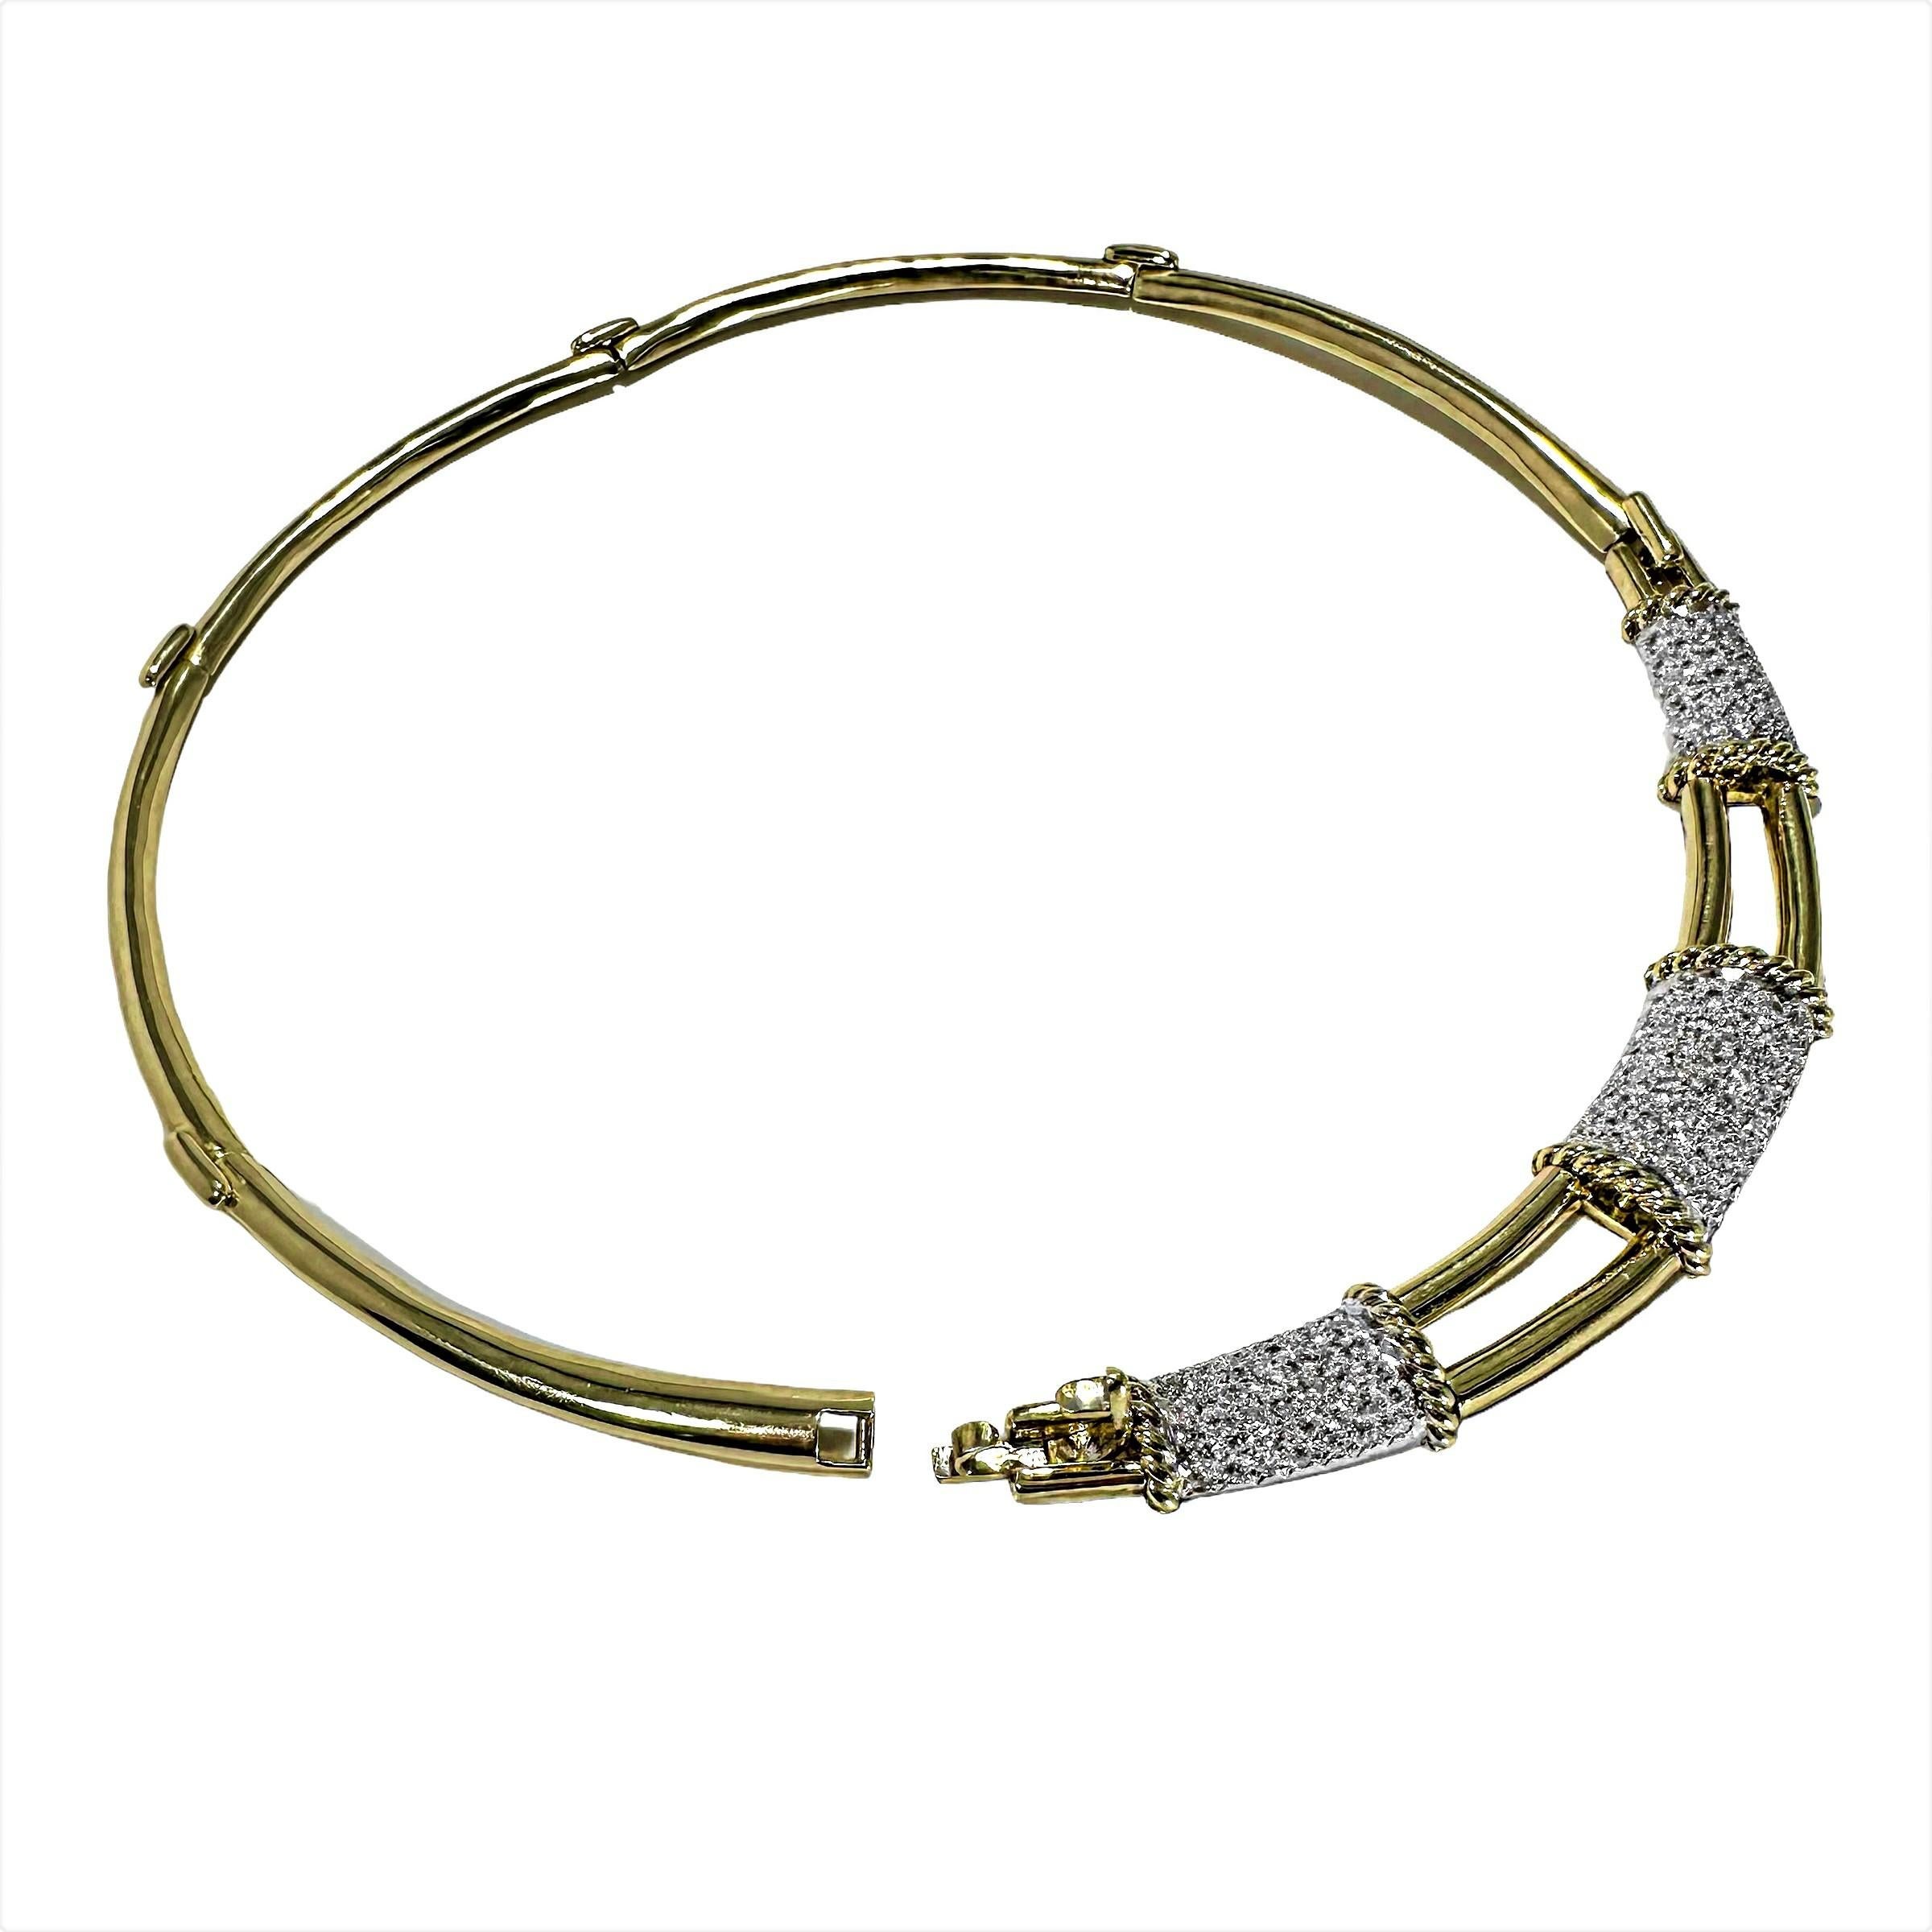 Elegant Mid-20th Century 18K Gold and Diamond Choker Necklace For Sale 2